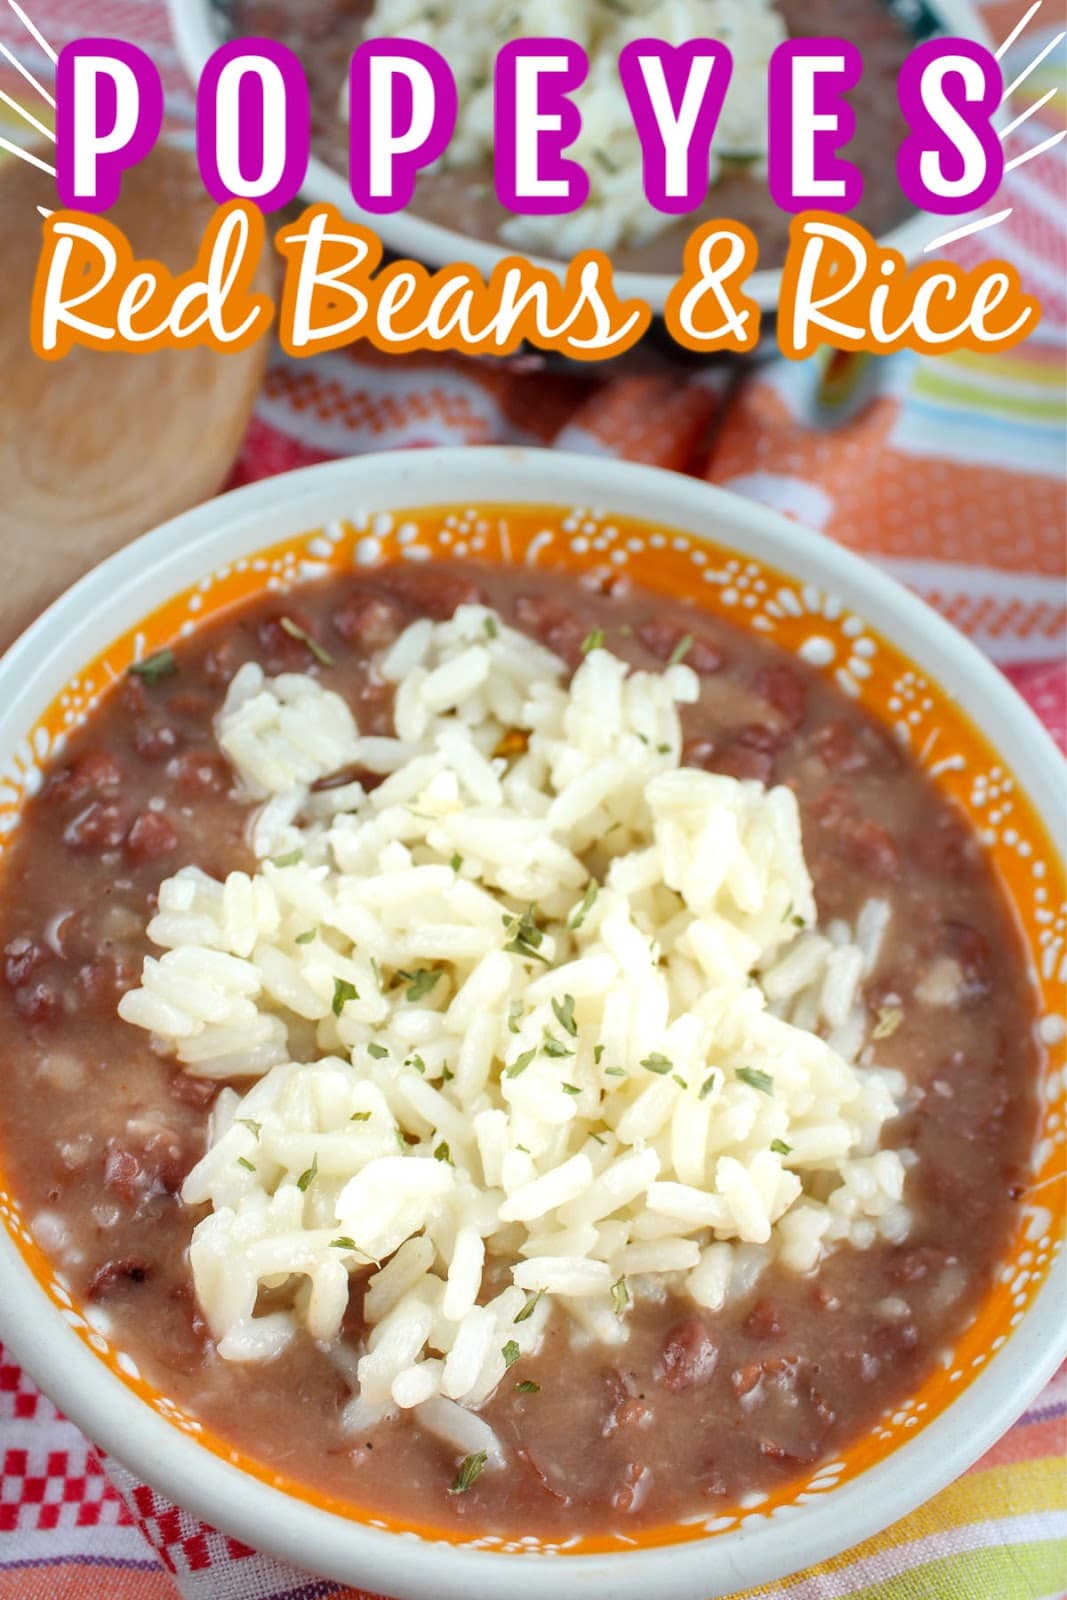 Popeye’s Red Beans & Rice is one of my favorite take-out side dishes and making it at home is SO SIMPLE!!!! Creamy red beans with a slightly smoky flavor topped with fluffy white rice – the perfect side! via @foodhussy